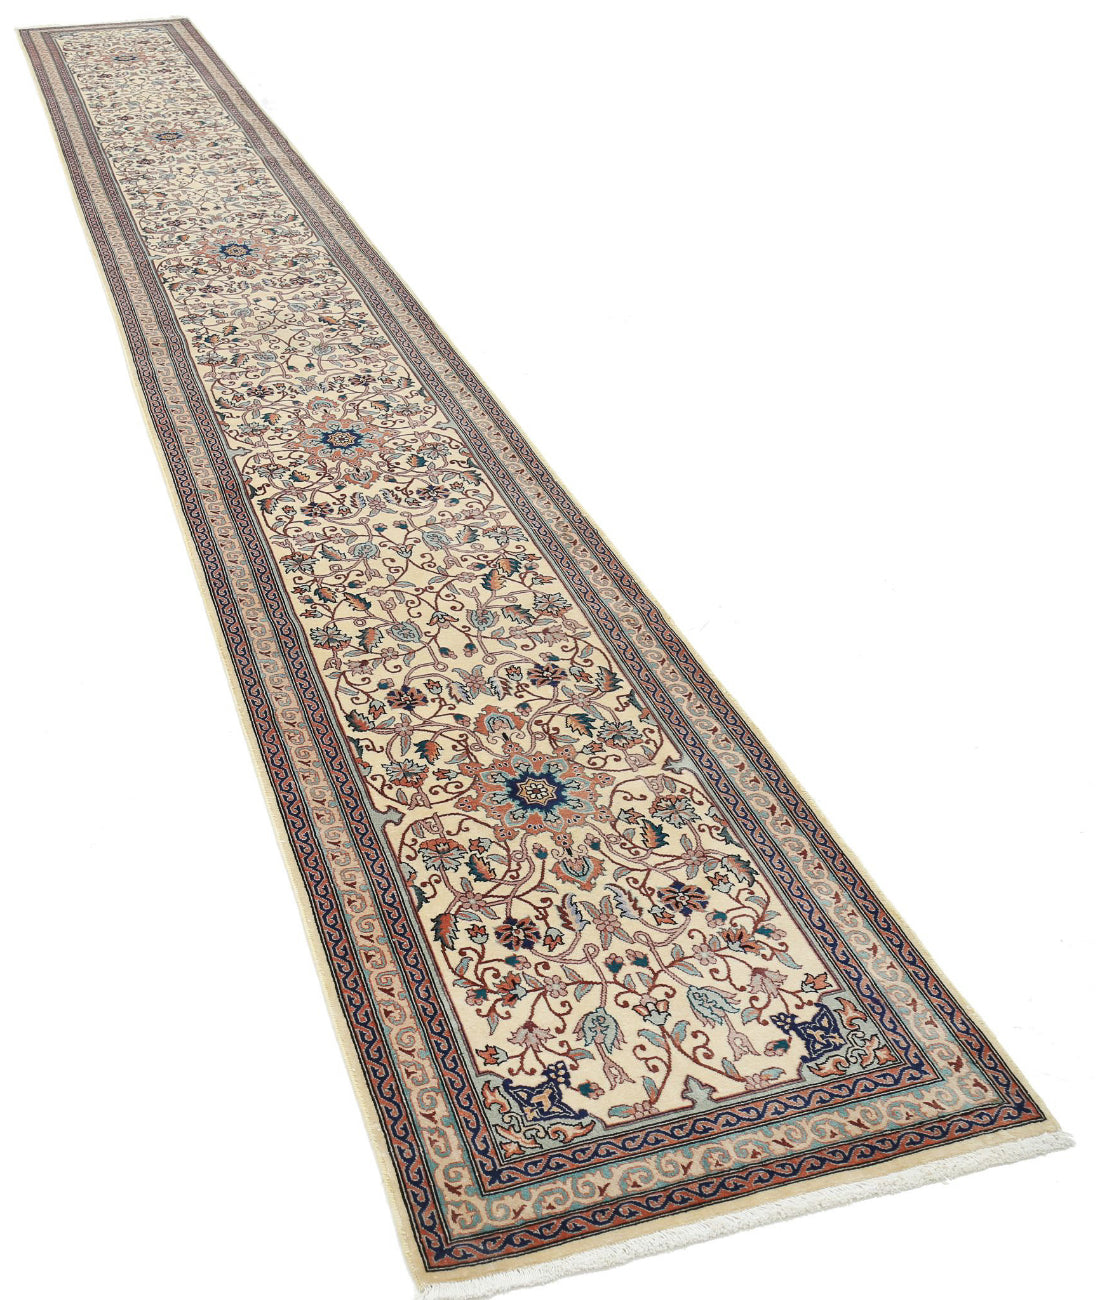 Hand Knotted Heritage Persian Style Wool Rug - 2'6'' x 19'10'' 2'6'' x 19'10'' (75 X 595) / Beige / Green